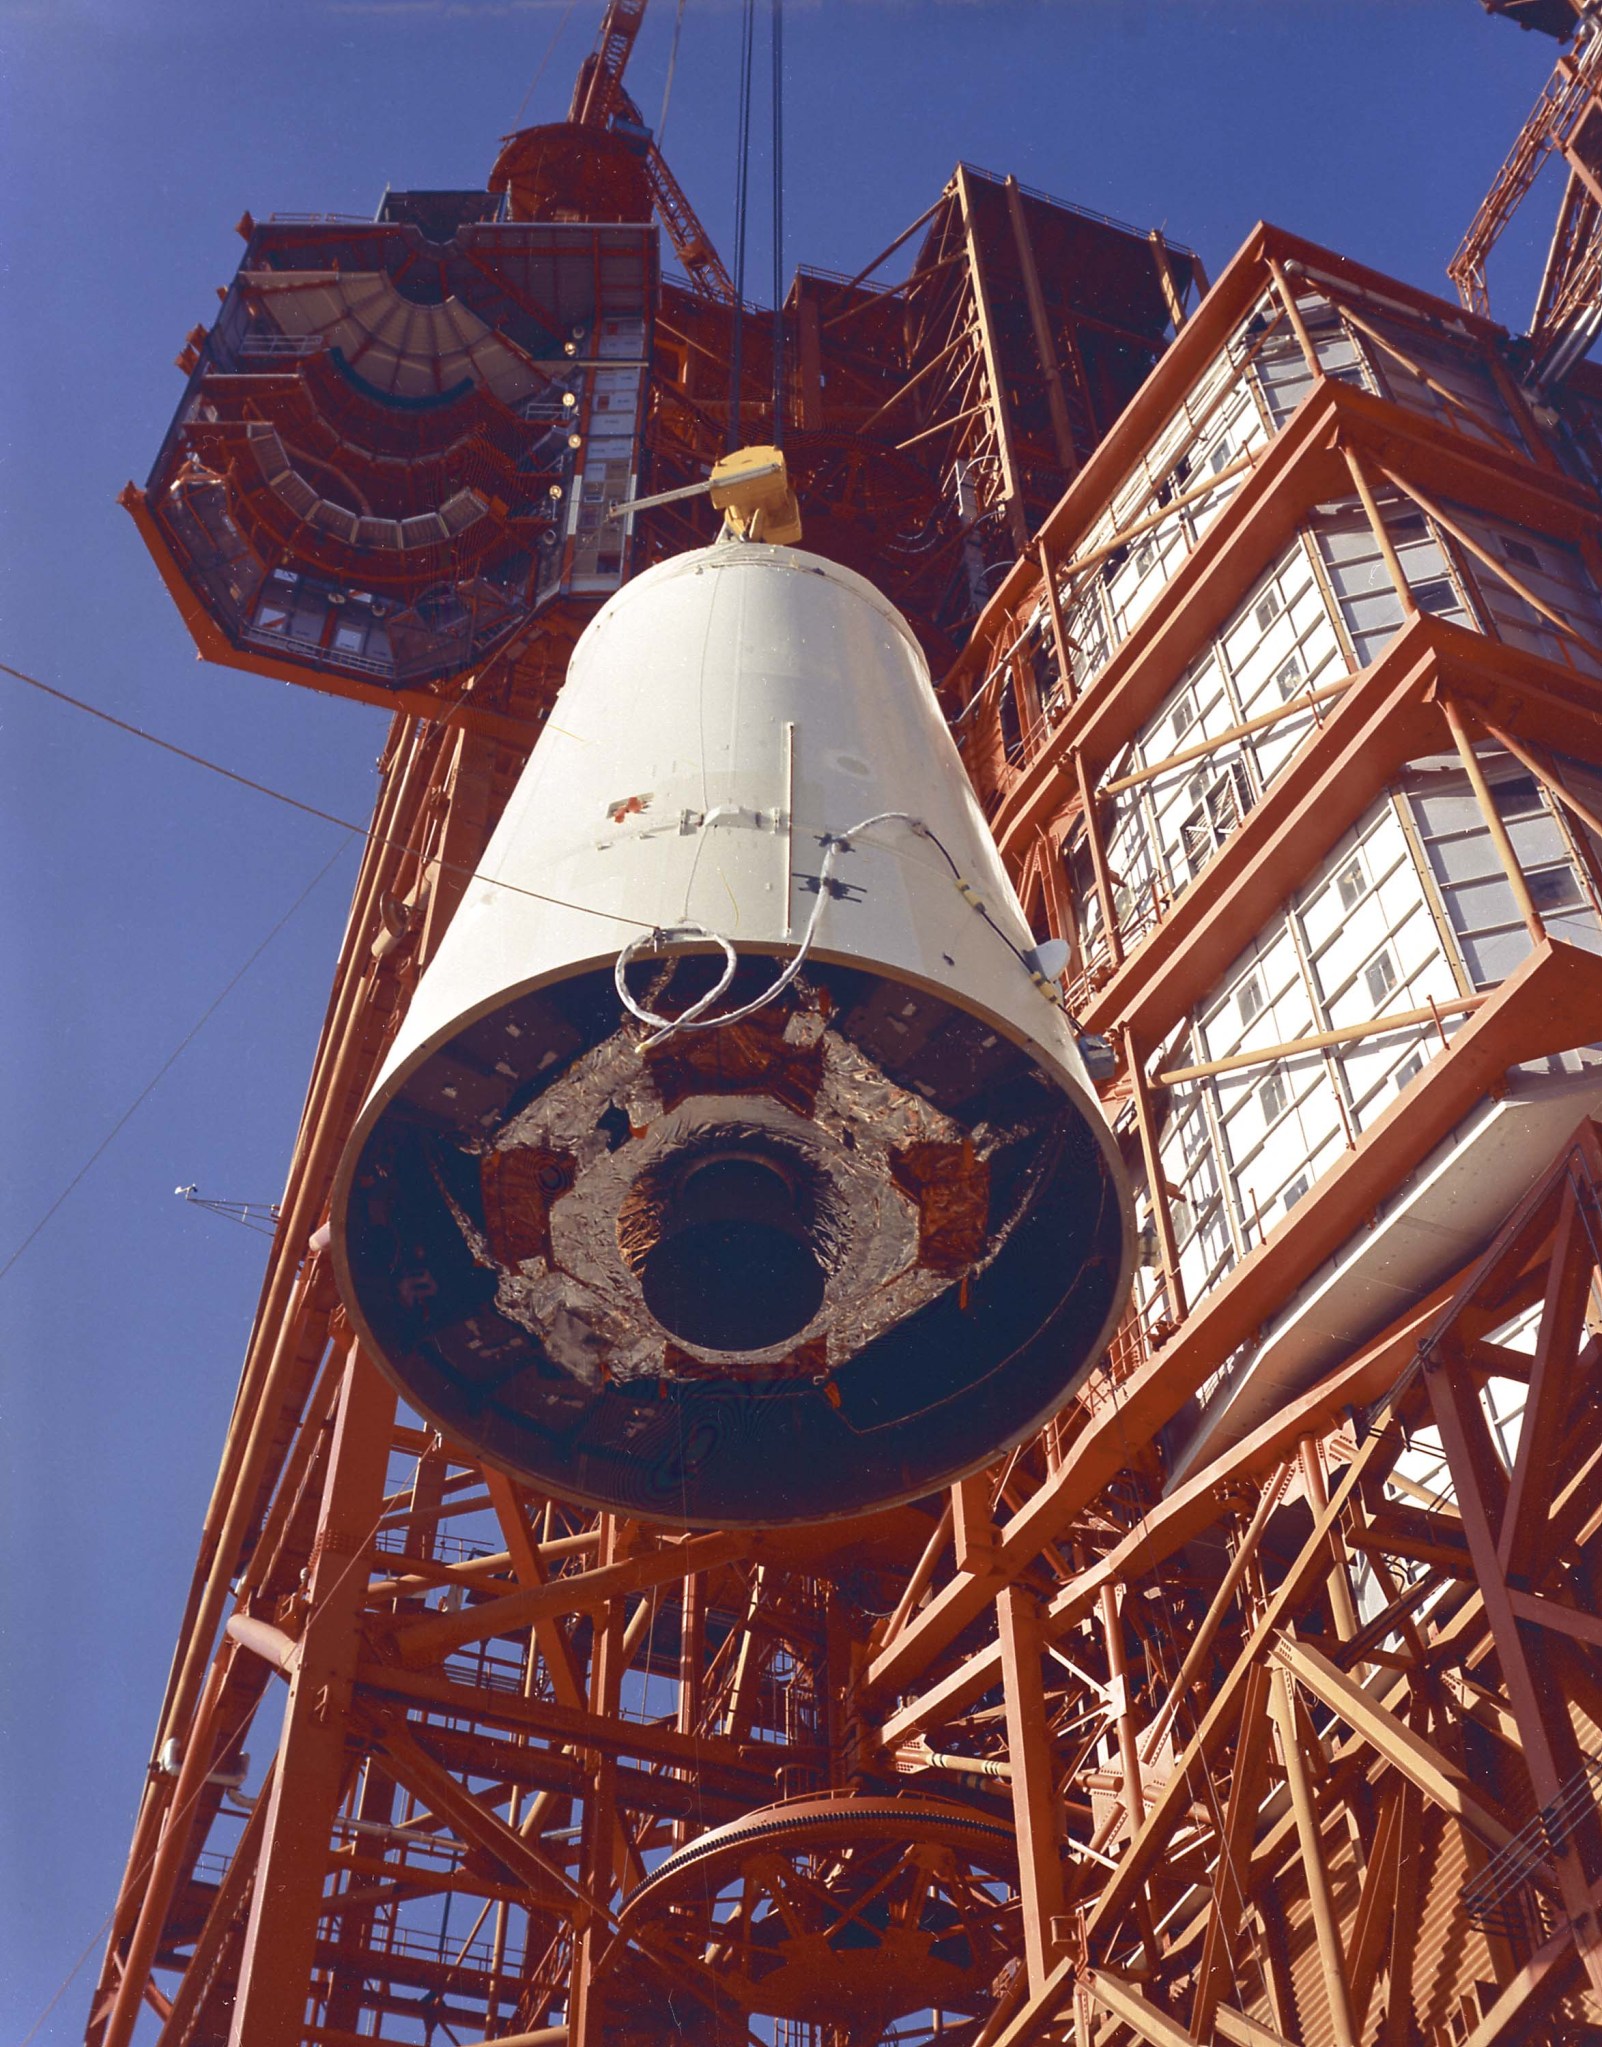 Apollo 5’s Lunar Module-1 being hoisted atop its Saturn 1B launch vehicle at Pad 37B.